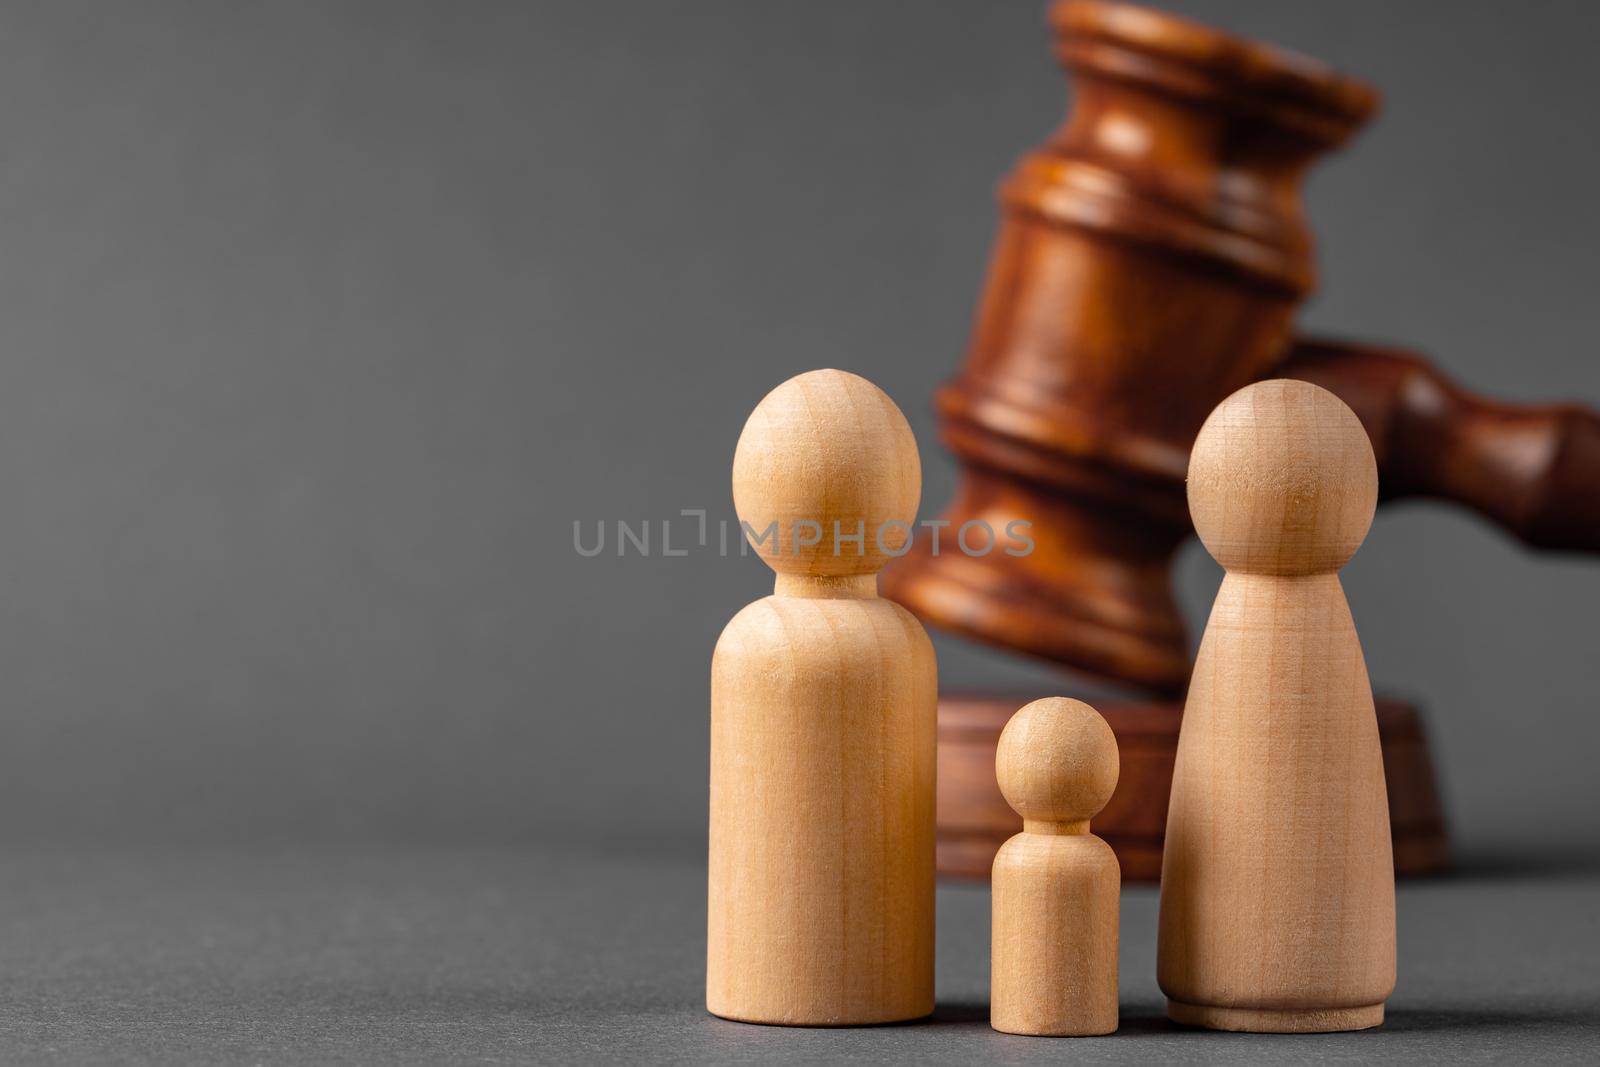 Wooden toy family and judge mallet. Family divorce concept by Fabrikasimf